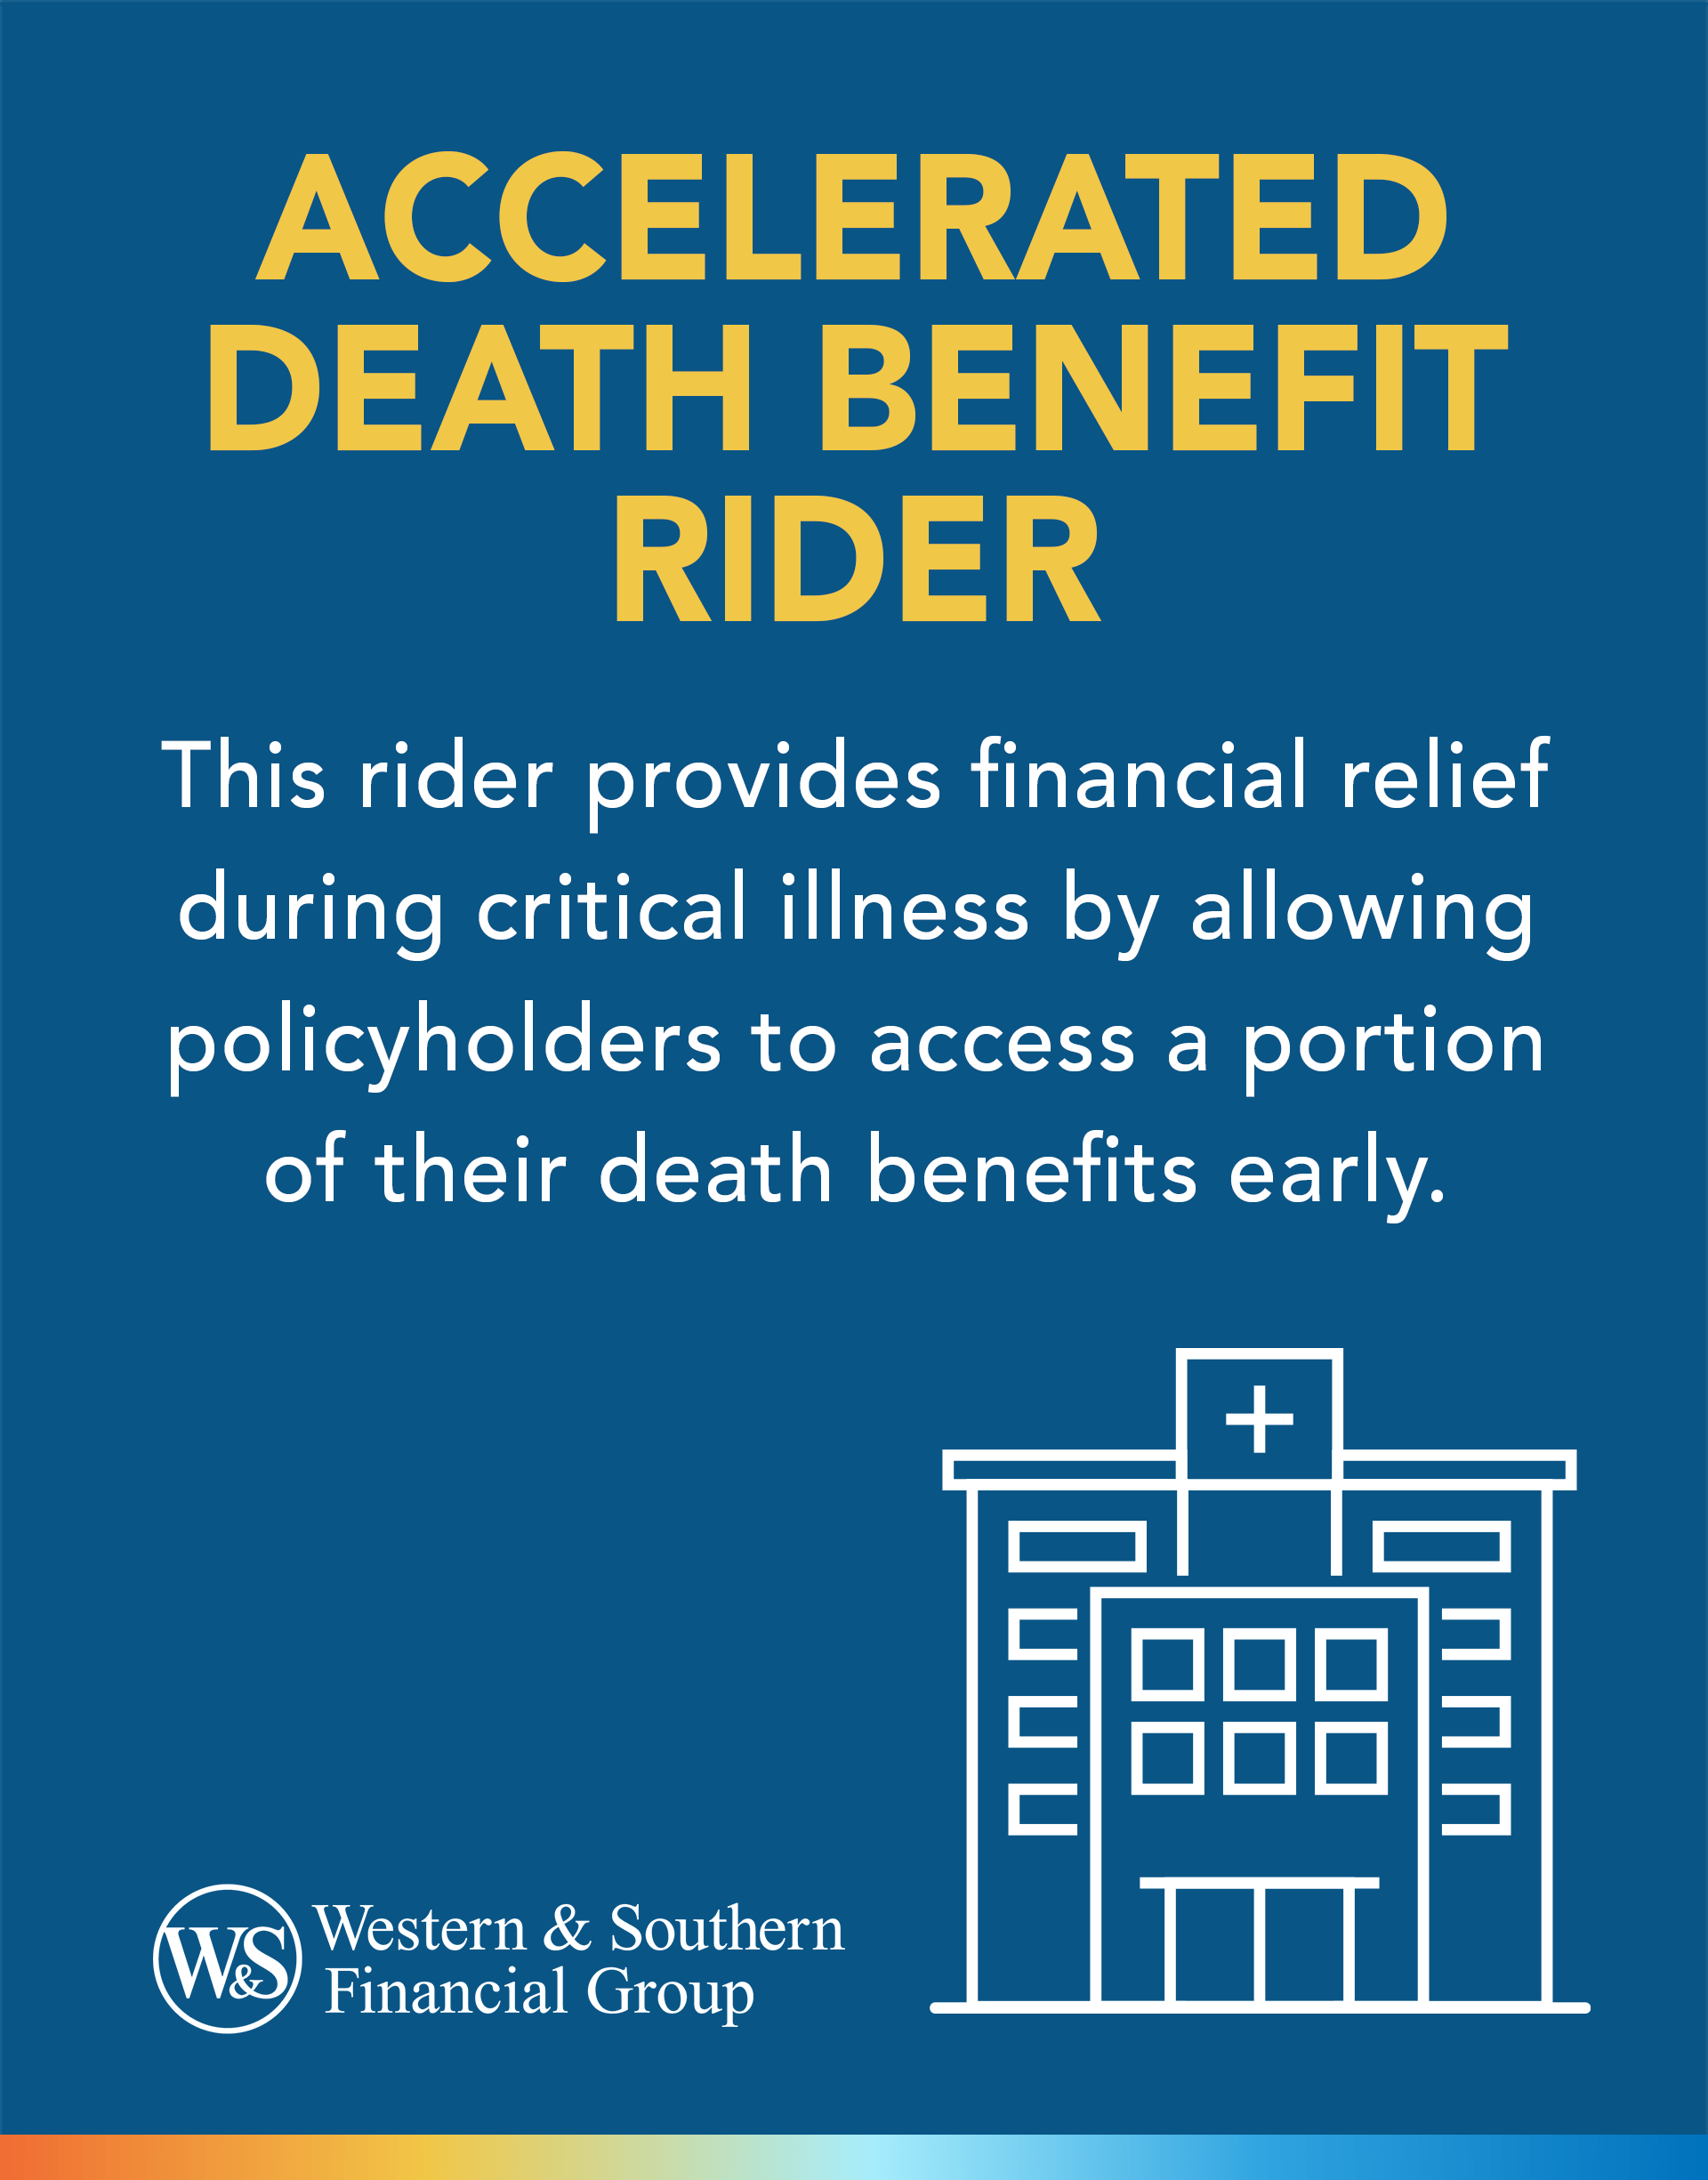 Accelerated Death Benefits Rider Definition